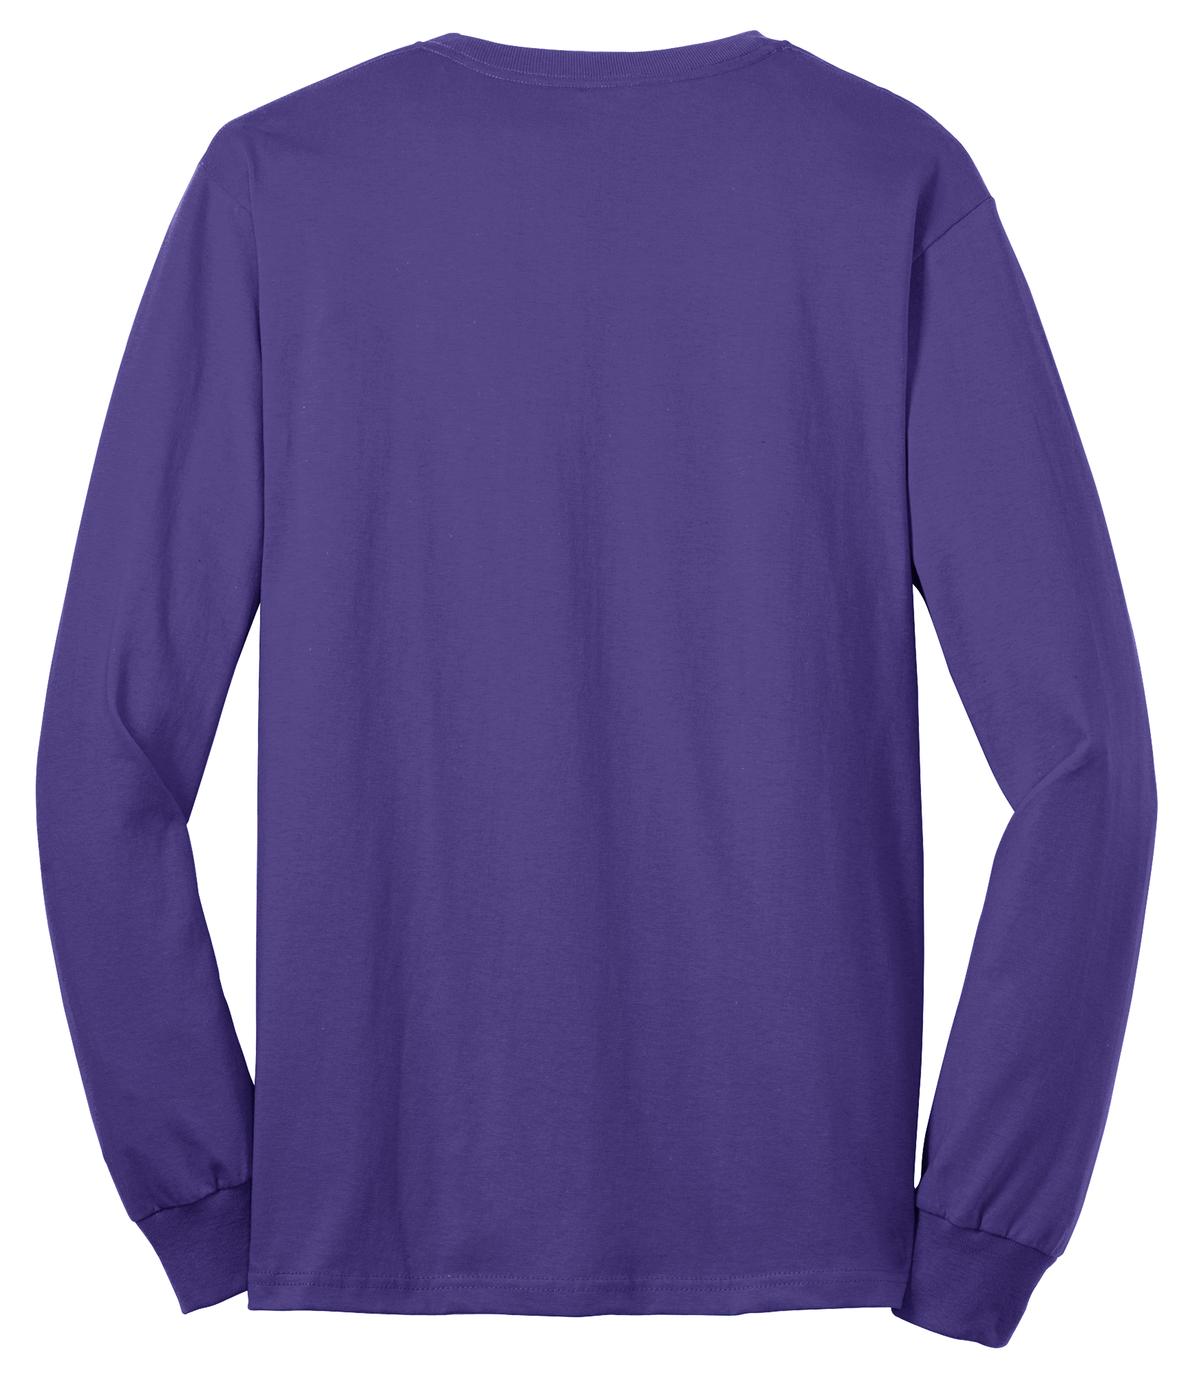 Swaasi Core - P&C® 5.5 oz 50/50 LONG-SLEEVE T-Shirt with Print Logo